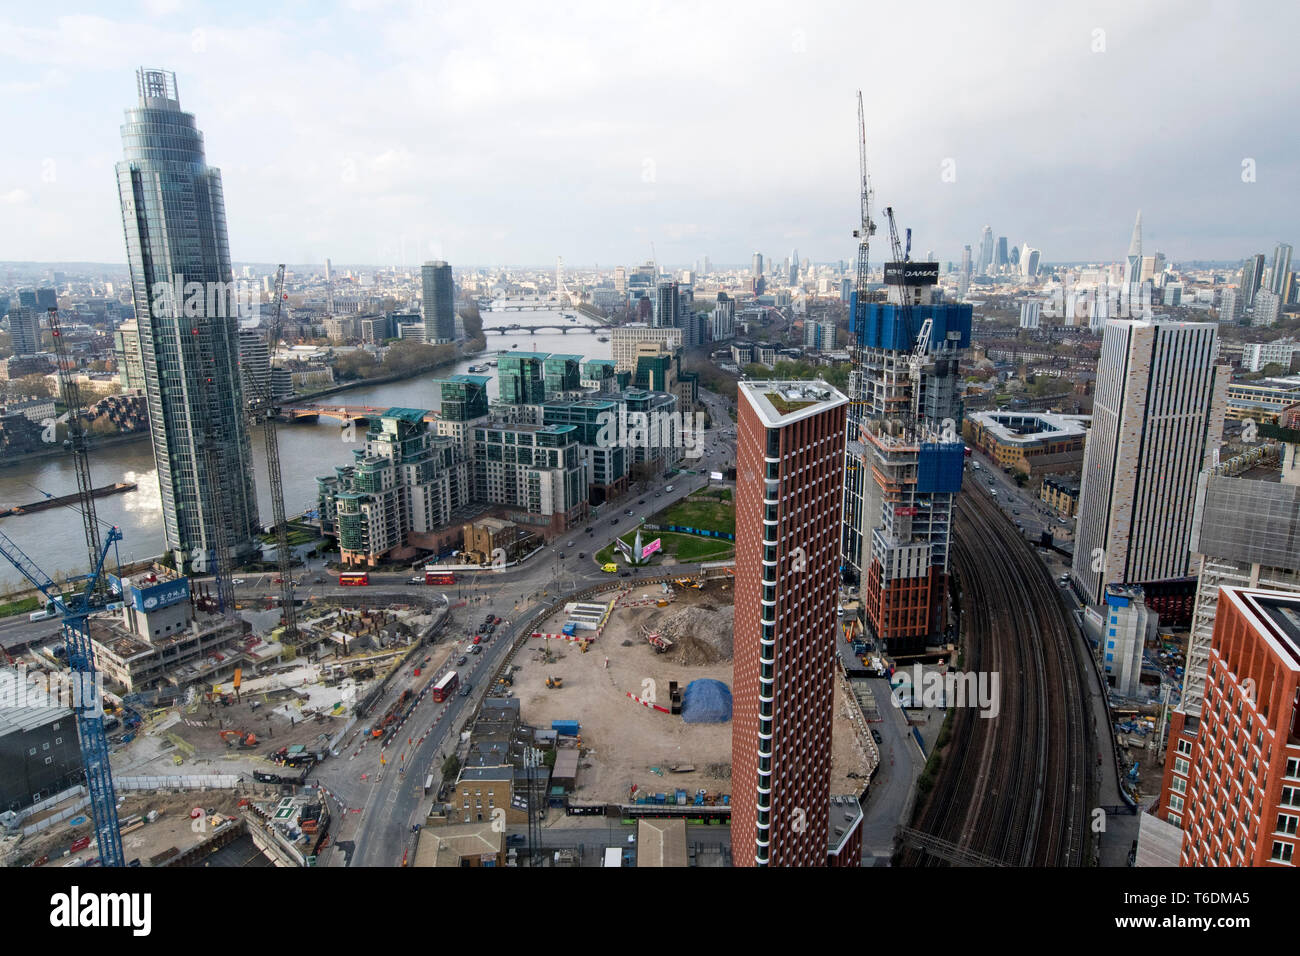 One Nine Elms Foundations (L) Damac Tower (R), Nine Elms, south London, by St George Wharf Tower on 13/04/2019 Stock Photo